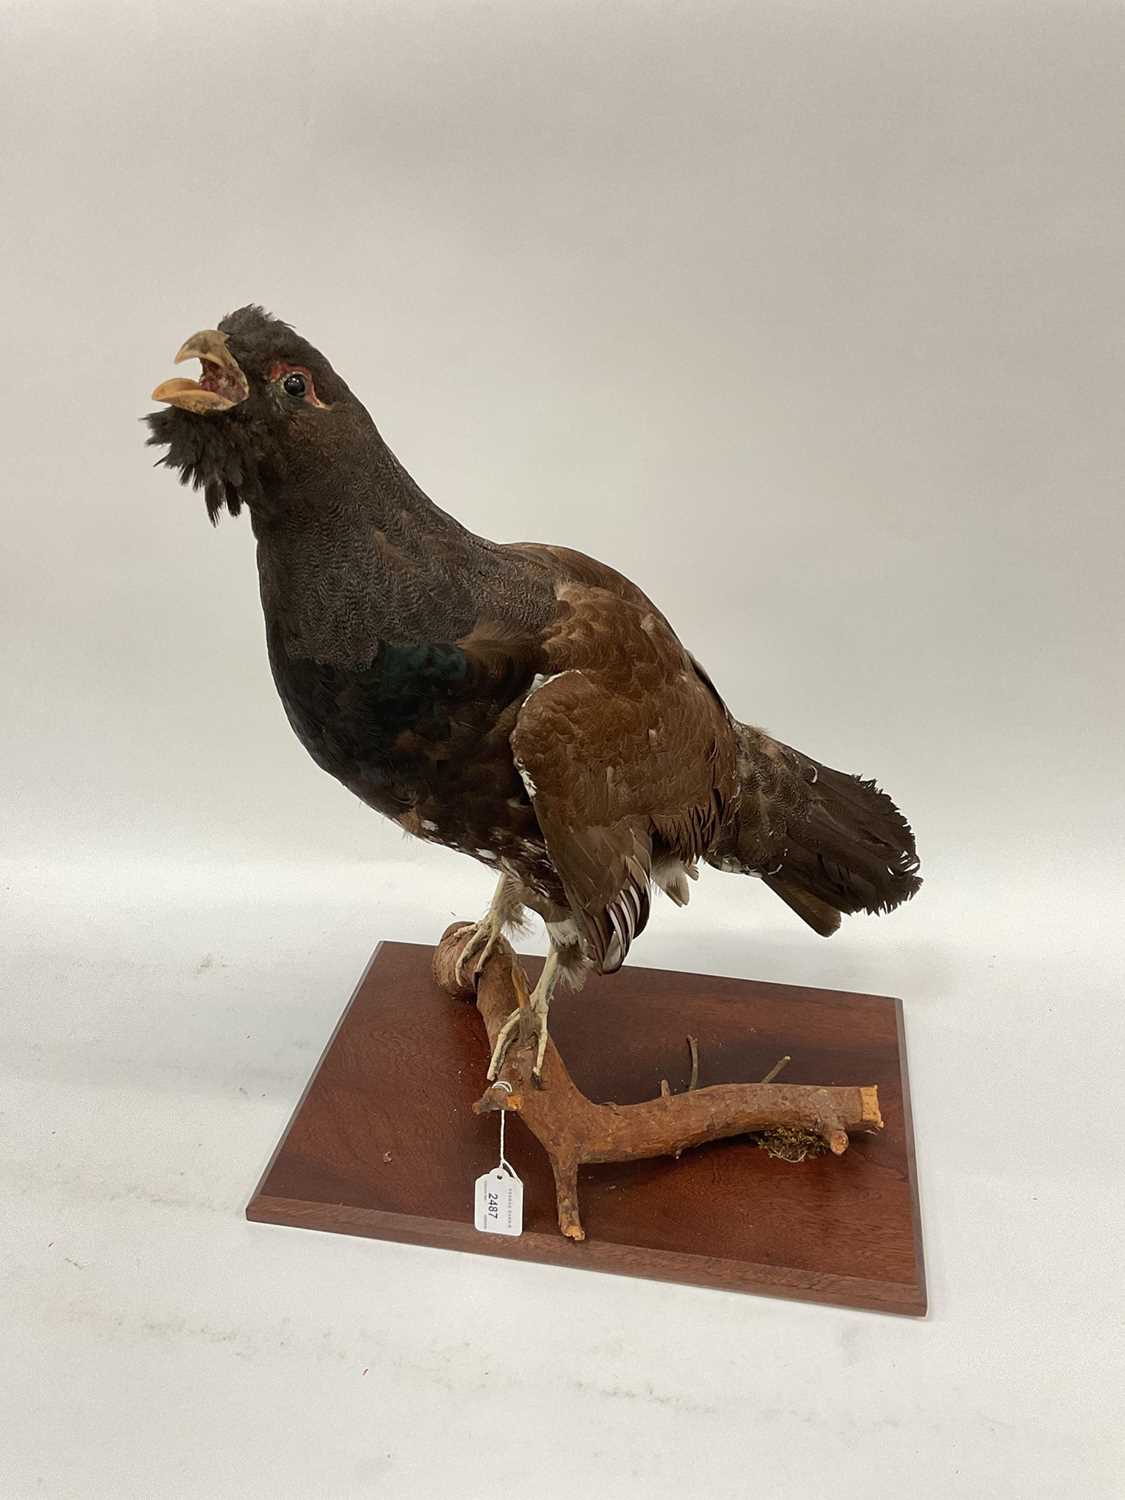 Taxidermy capercaillie on wooden base